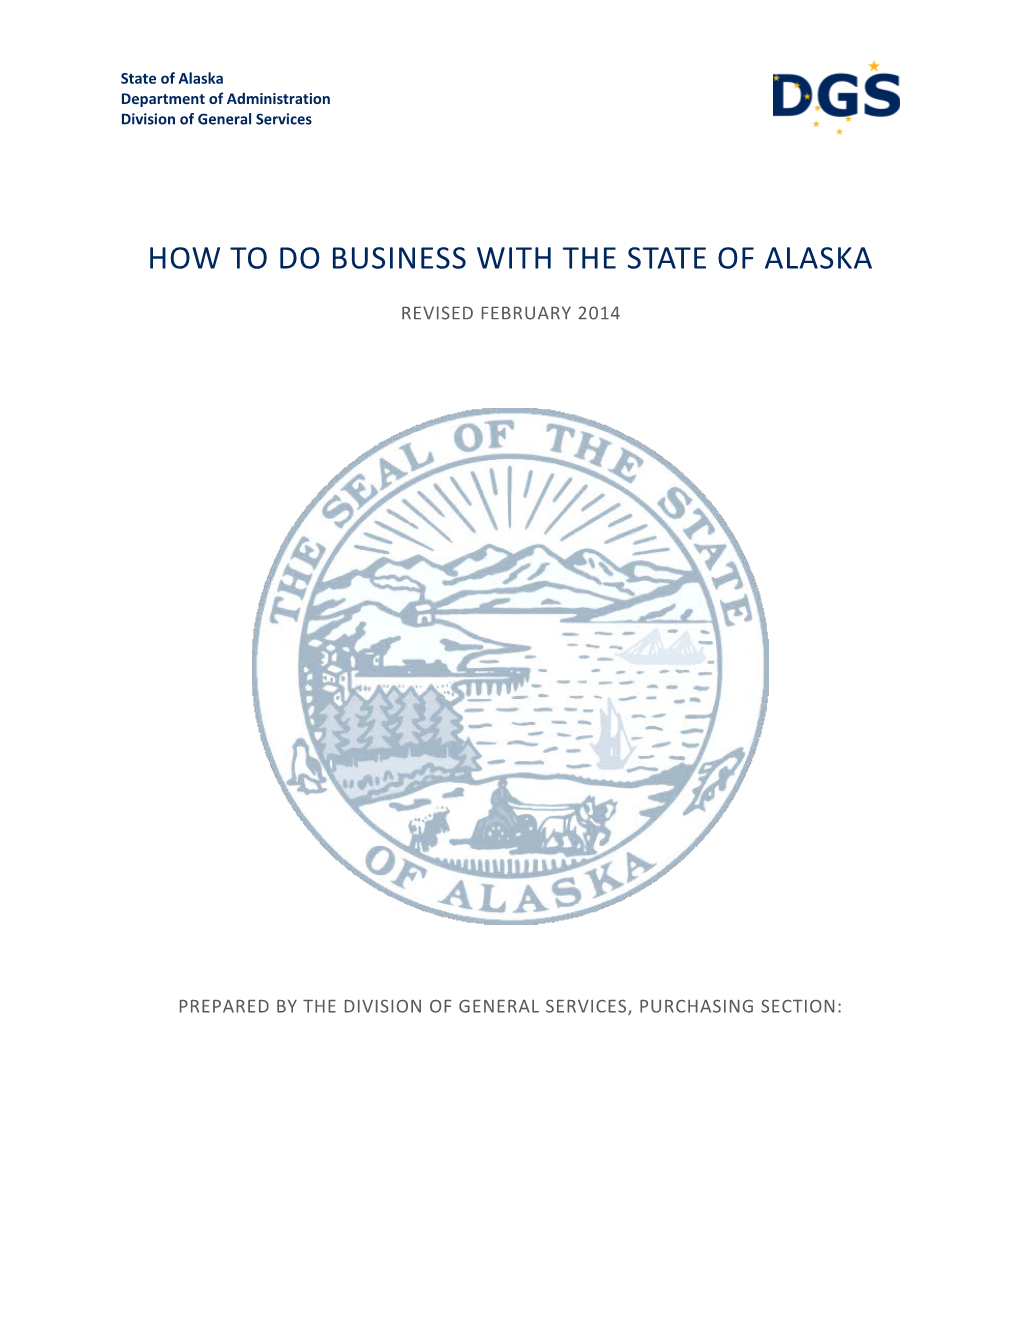 How to Do Business with the State of Alaska